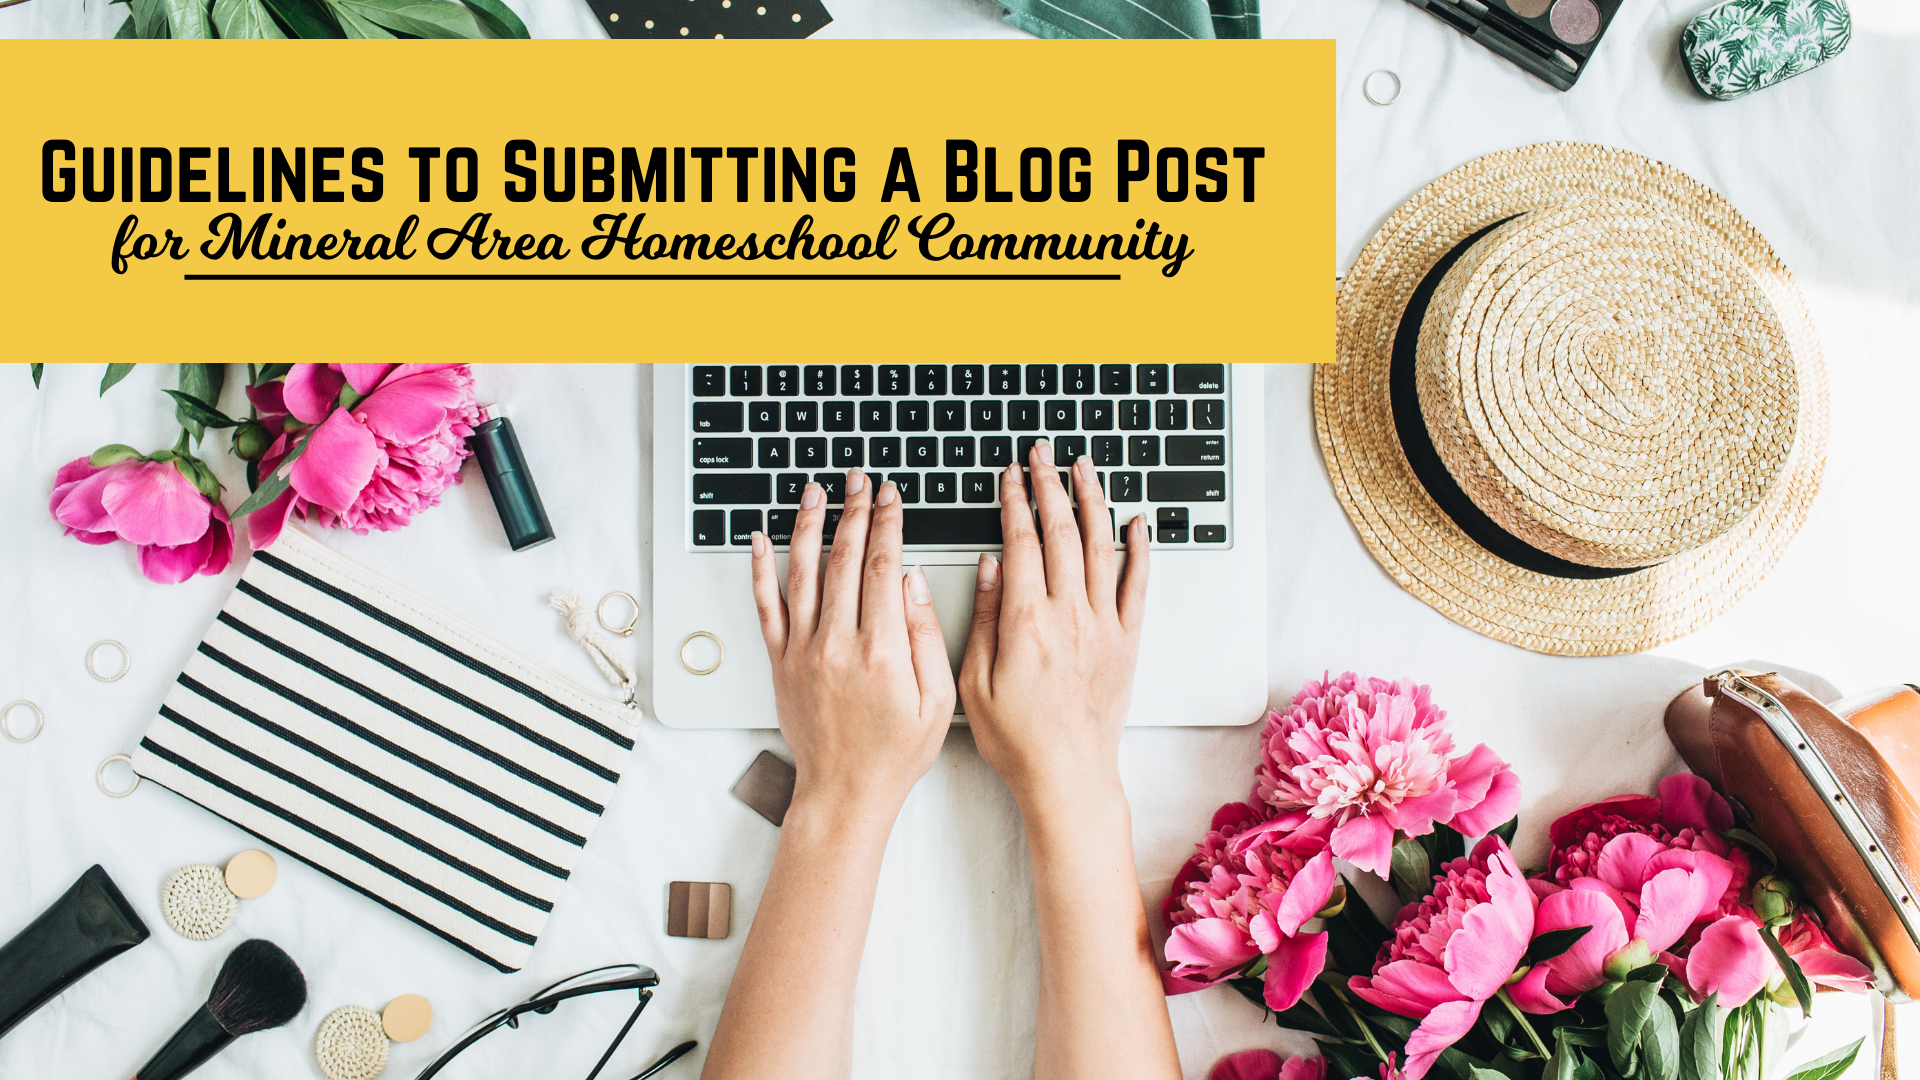 Guidelines to Submitting a Blog Post